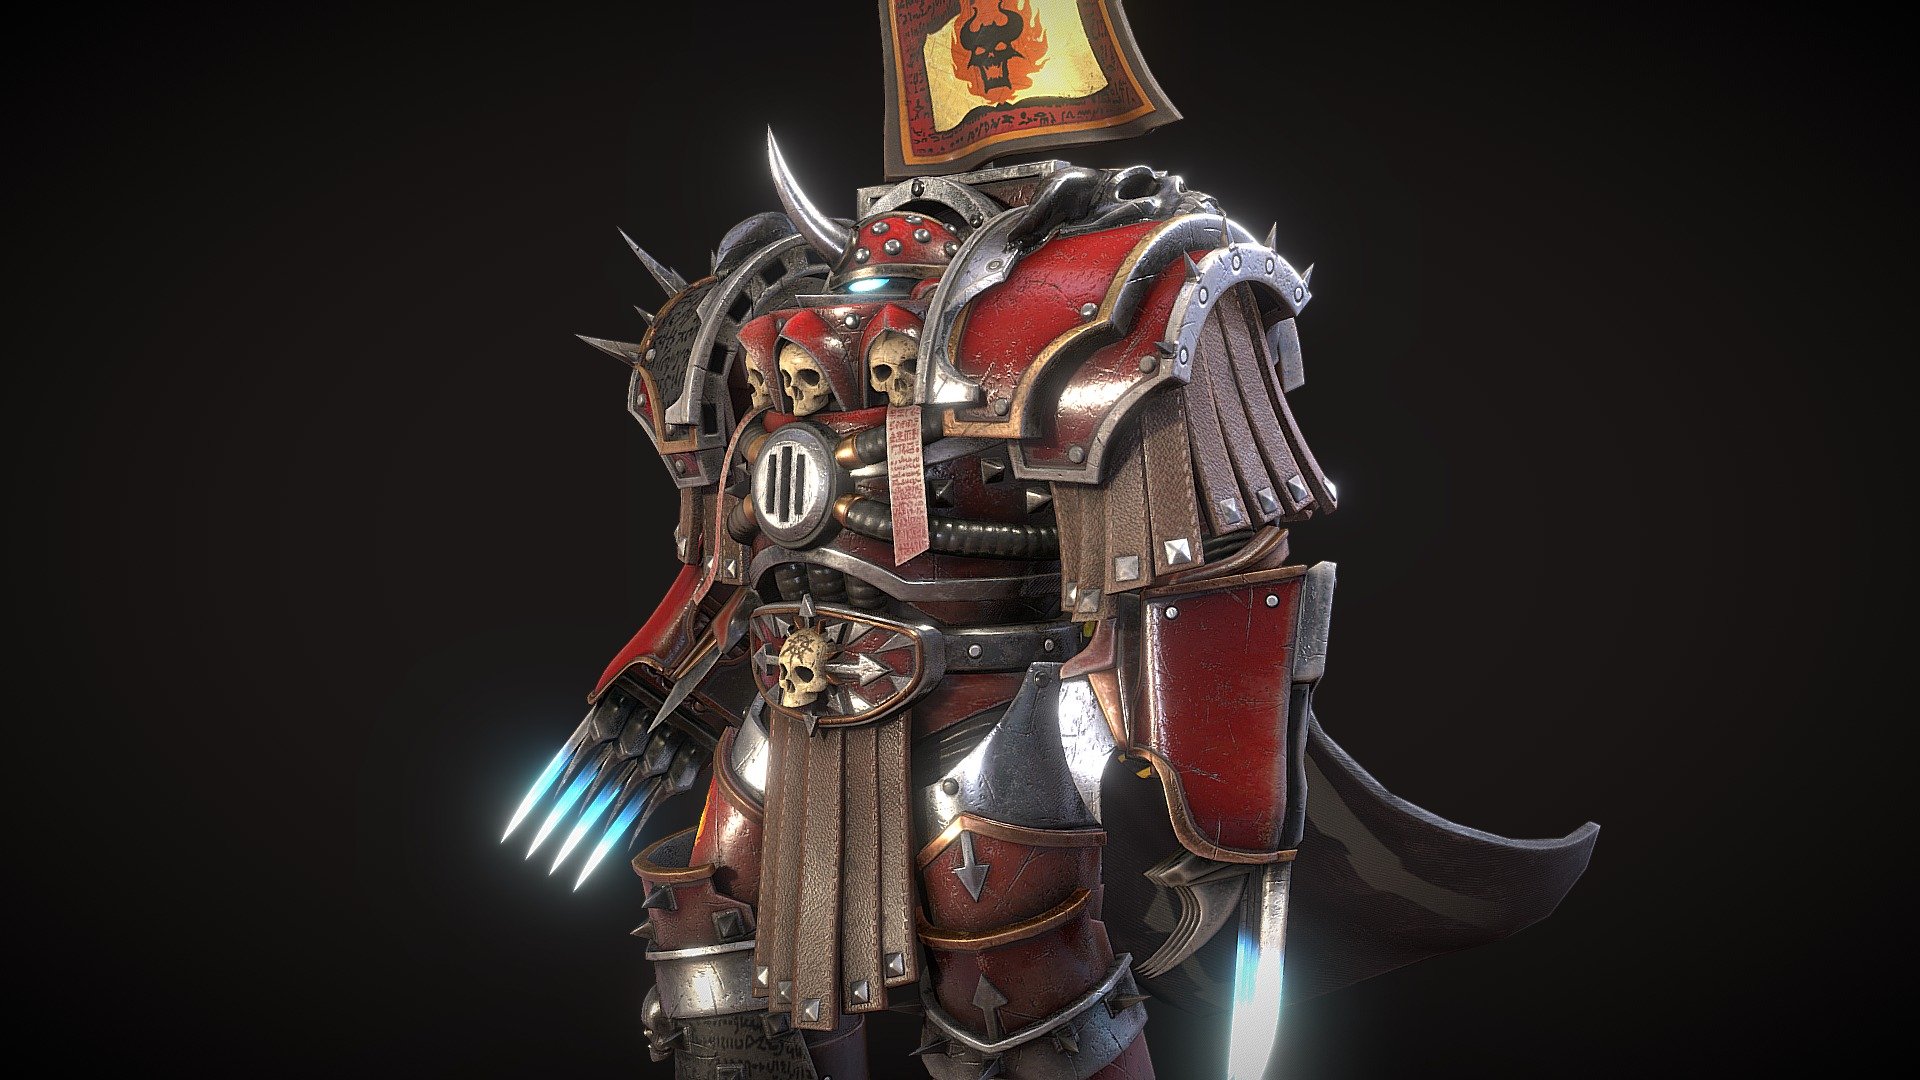 This is Brother Vardox of the traitorous Word Bearers Legion, ready to desecrate imperial worlds in the name of the Chaos Gods.
&lsquo;'Speak the words of Lorgar and you shall live forever in the glory of Chaos. Speak them not and every one of you shall die today.'&lsquo;

https://www.artstation.com/christopheduranddeshaies - Chaos Space Marine Terminator (Word Bearers) - 3D model by HumpalumpaQc (@mod.christophe.duranddeshaies) 3d model